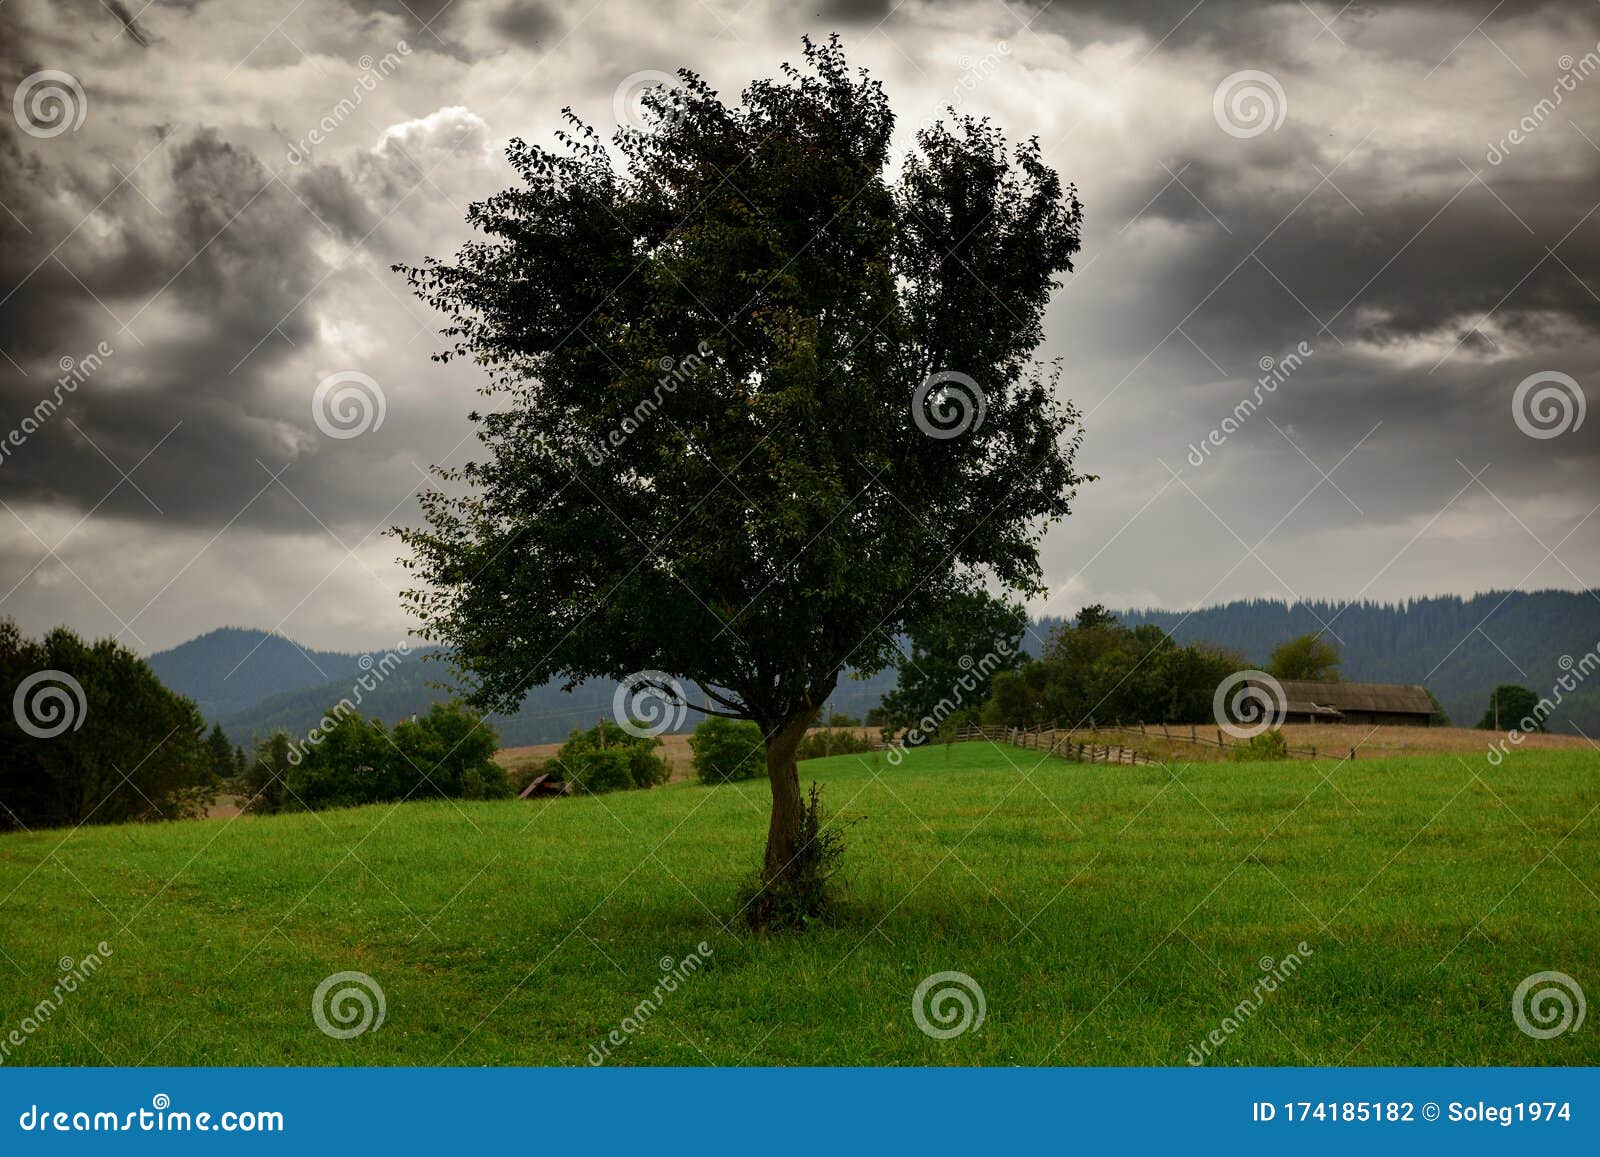 Dark Clouds, Stormy Sky and One Tree on a Meadow in Carpathian